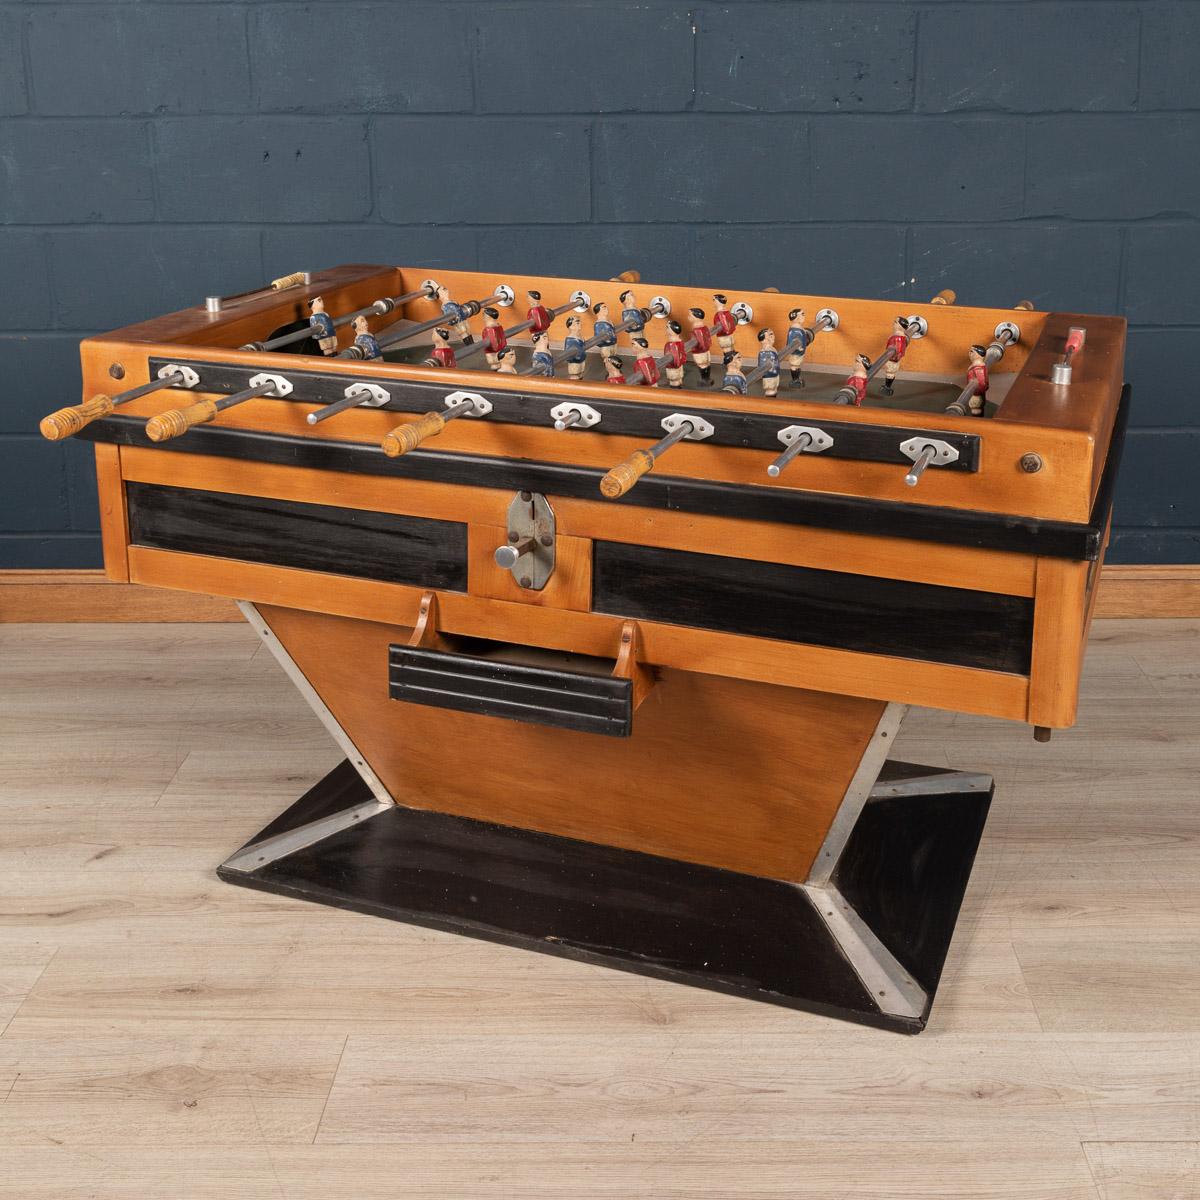 Beautiful French table football game (also known as a foosball table), early to mid-20th century. Painted and varnished wood and chromium plated and other metals, each side with four wooden-handled rods, the footballers of painted wood, a label to